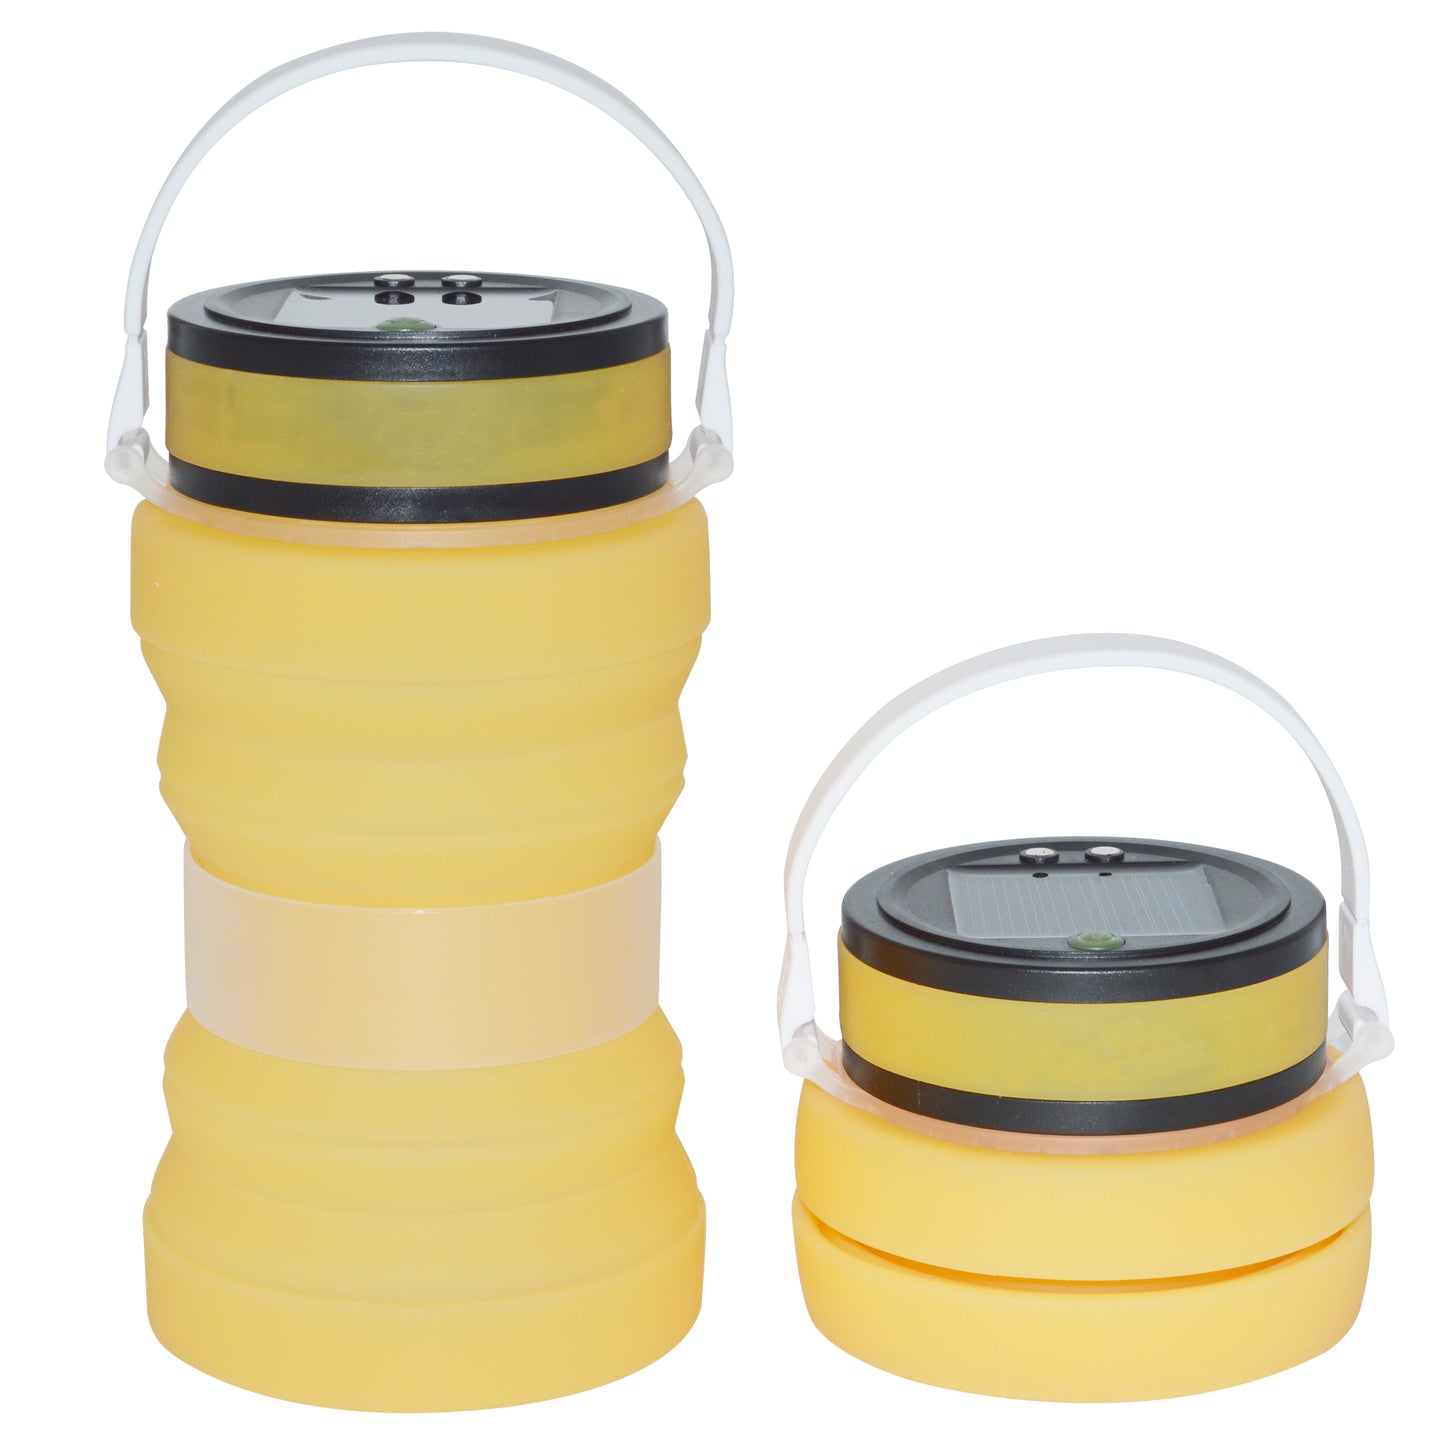 Camping light lantern torch compact silicone solar & USB charging